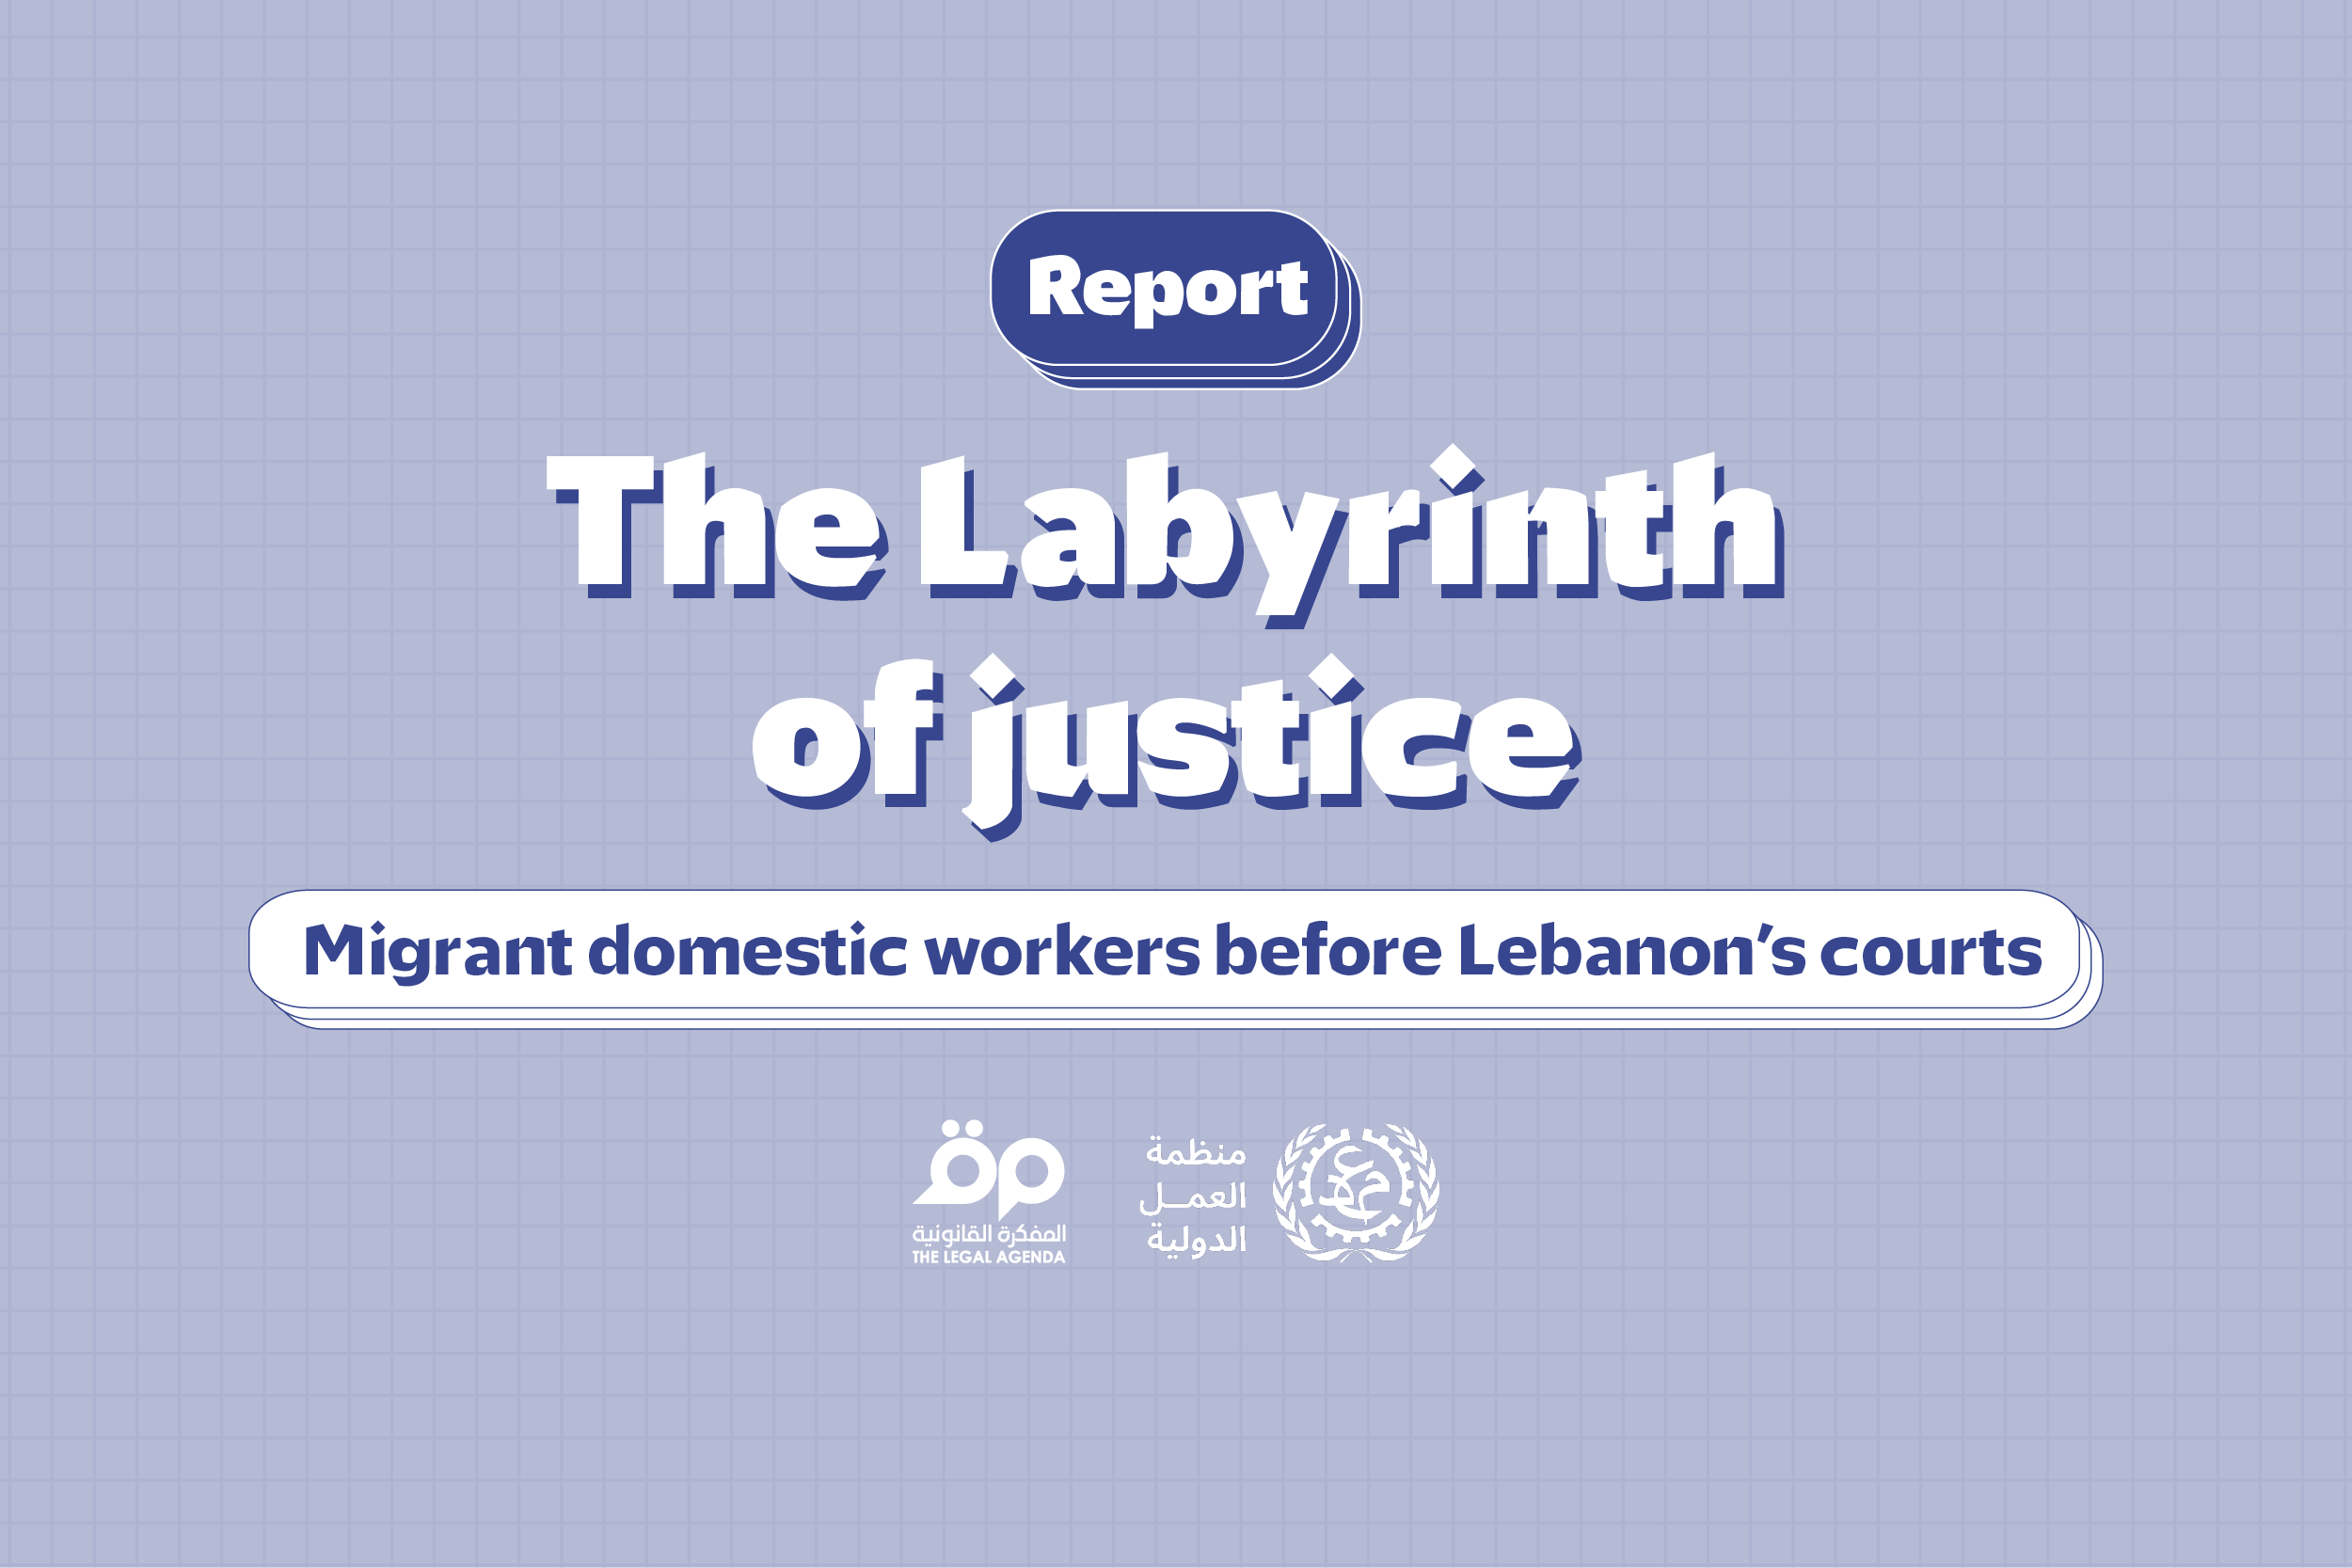 The Labyrinth of justice: Migrant domestic workers before Lebanon’s courts